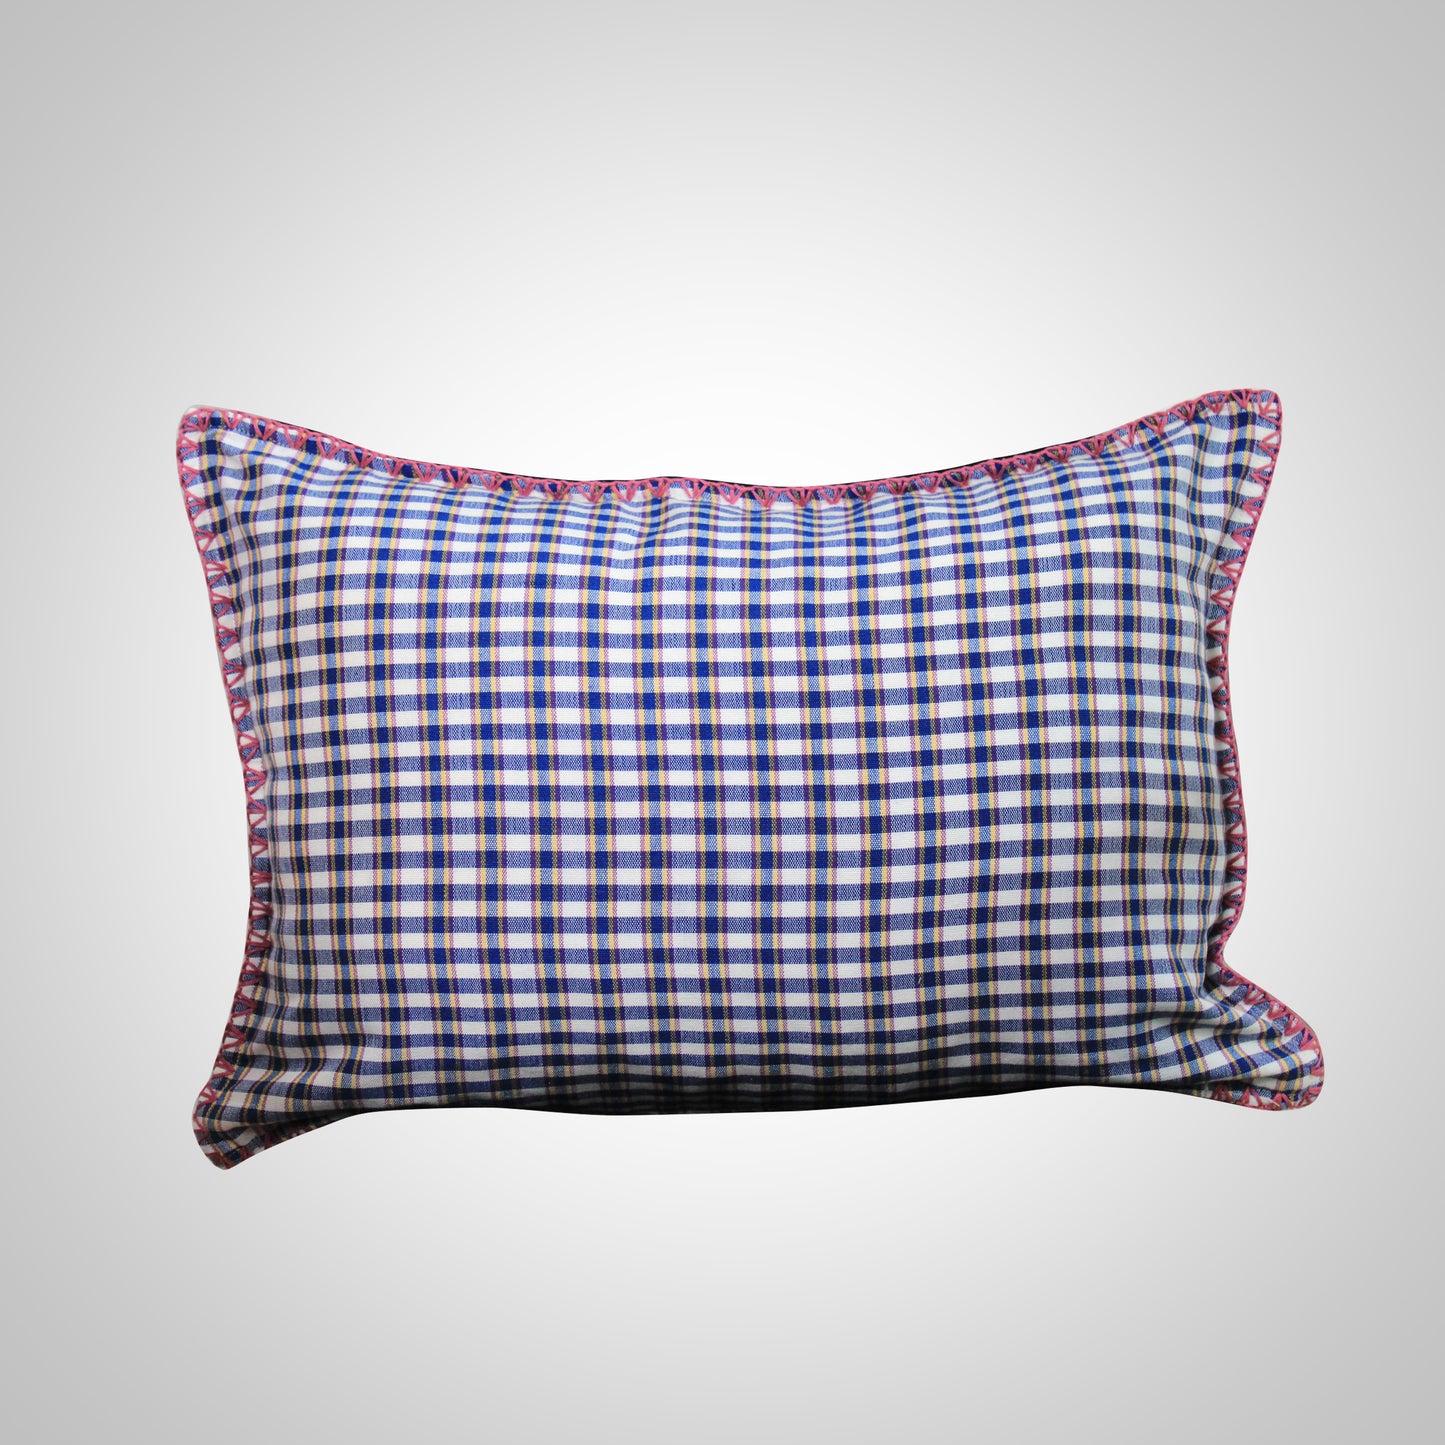 PILLOW COVER - 14x20